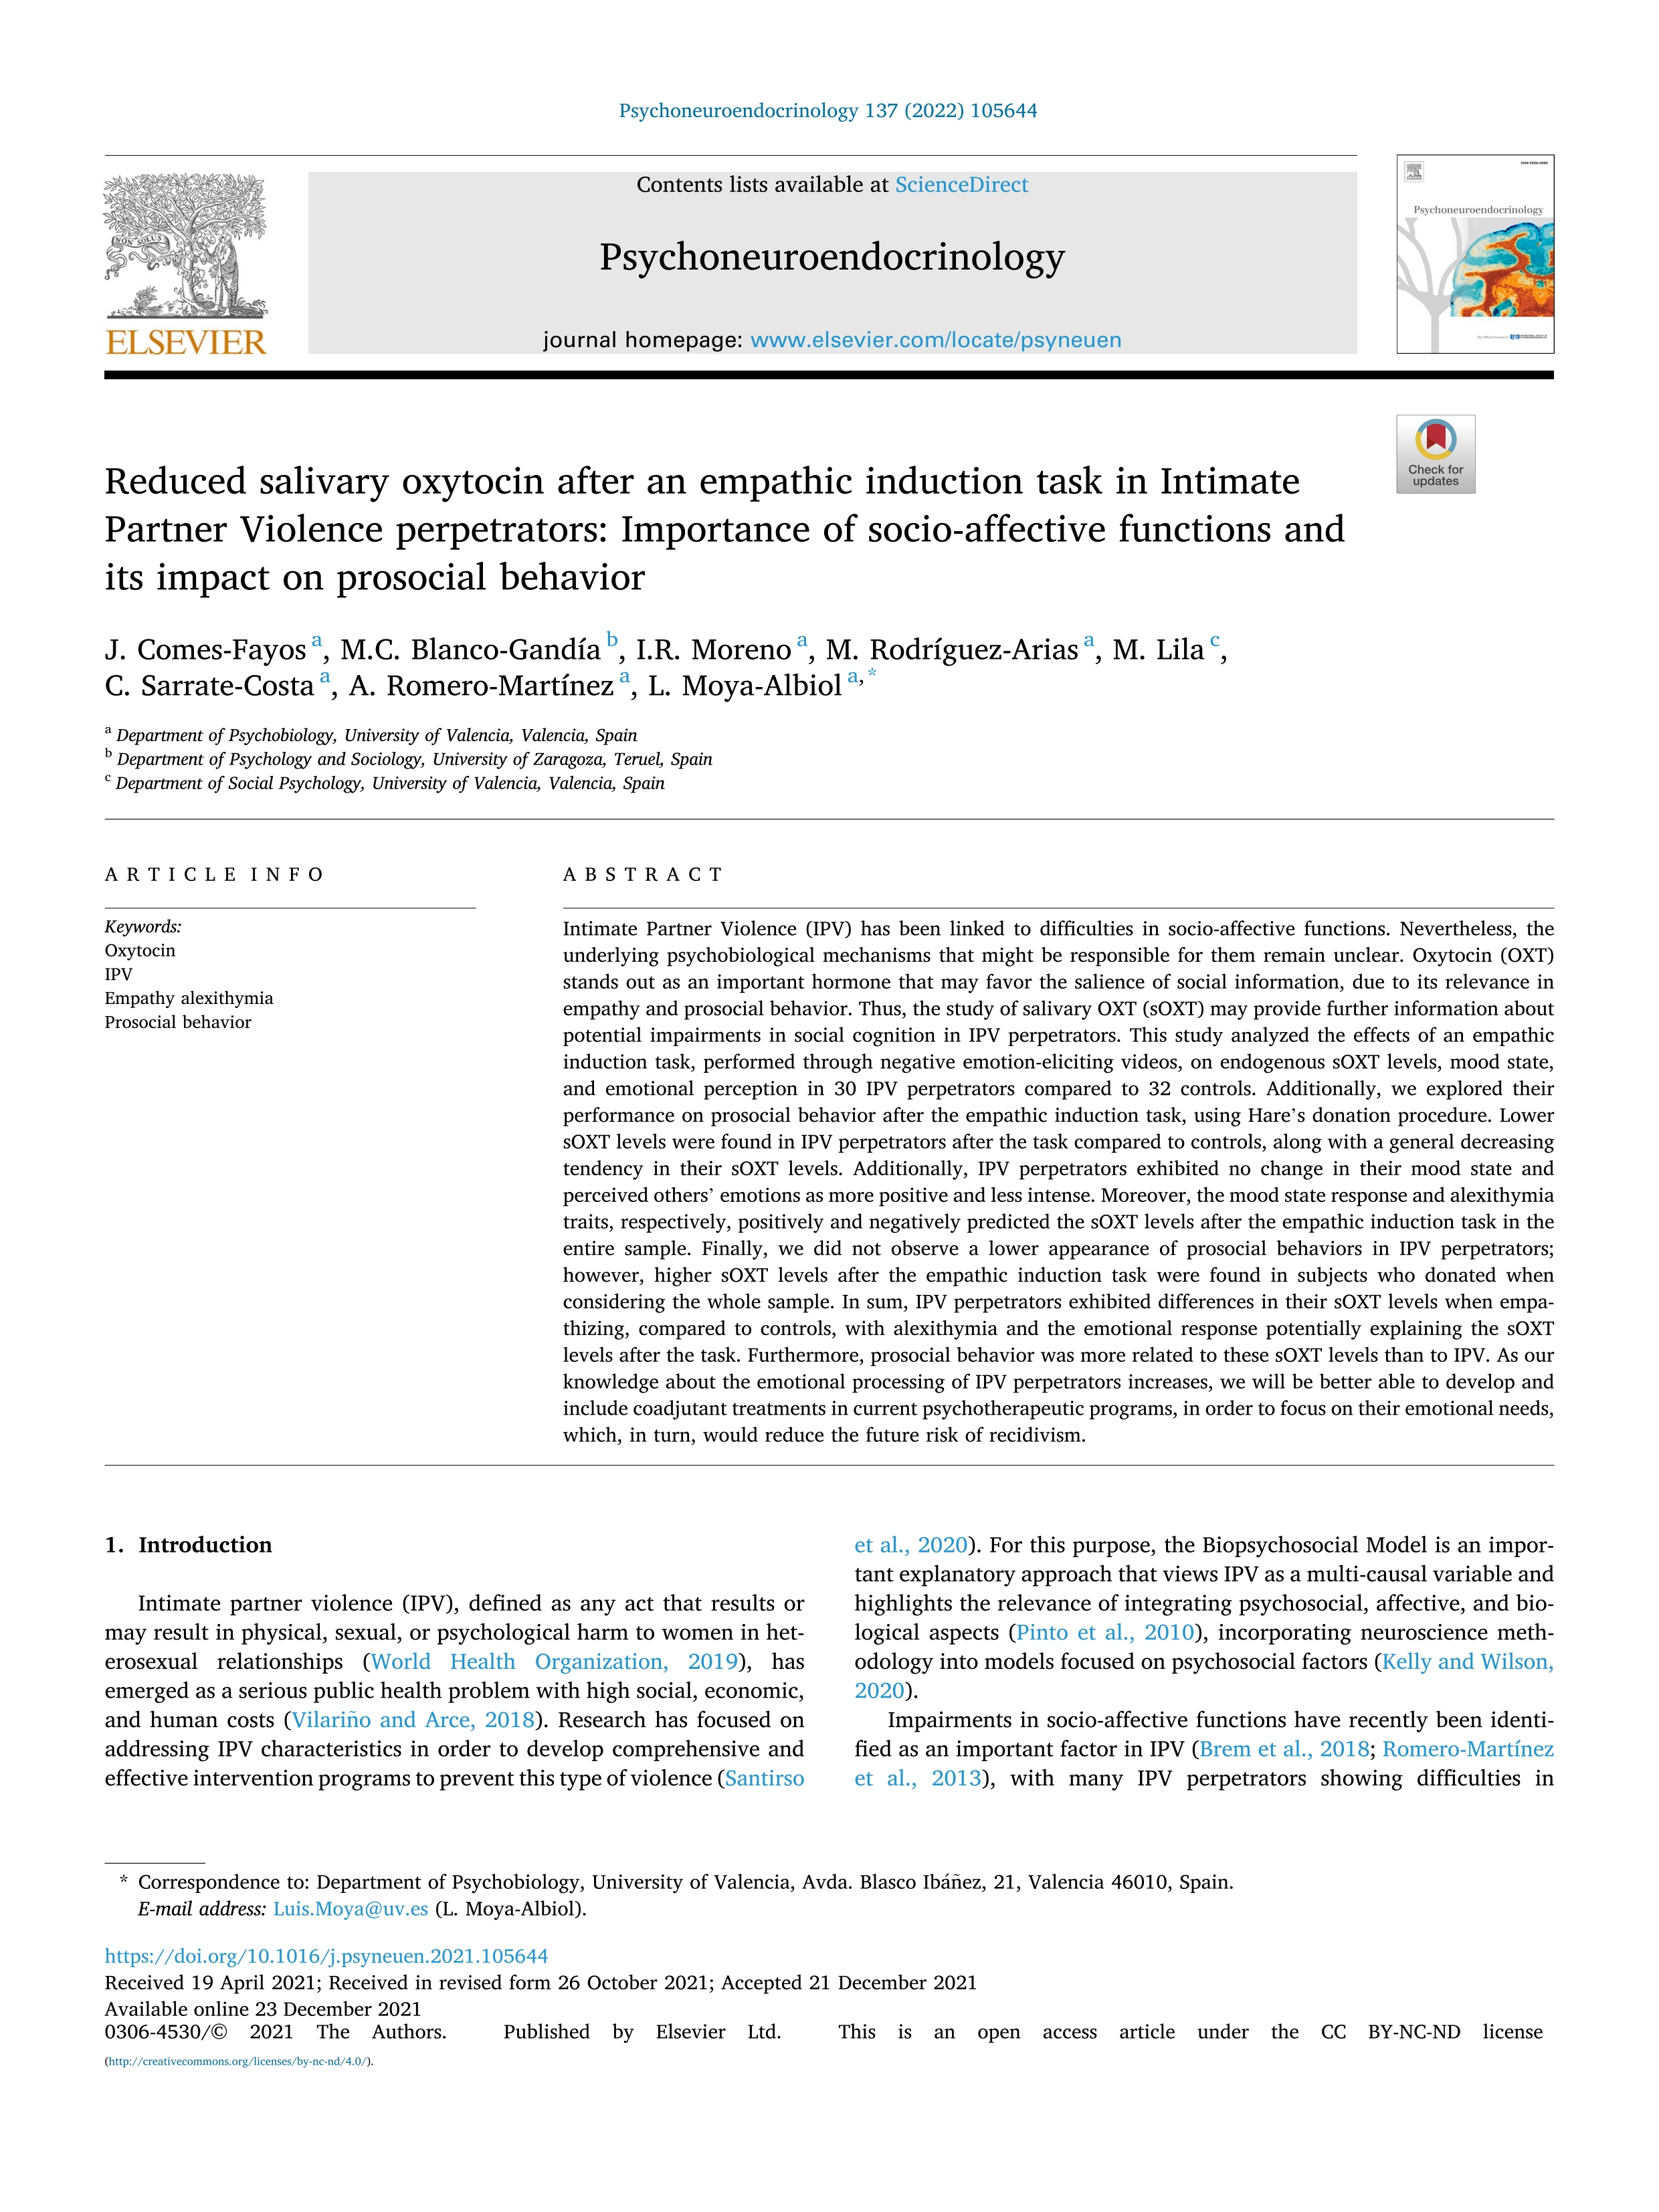 Reduced salivary oxytocin after an empathic induction task in Intimate Partner Violence perpetrators: Importance of socio-affective functions and its impact on prosocial behavior